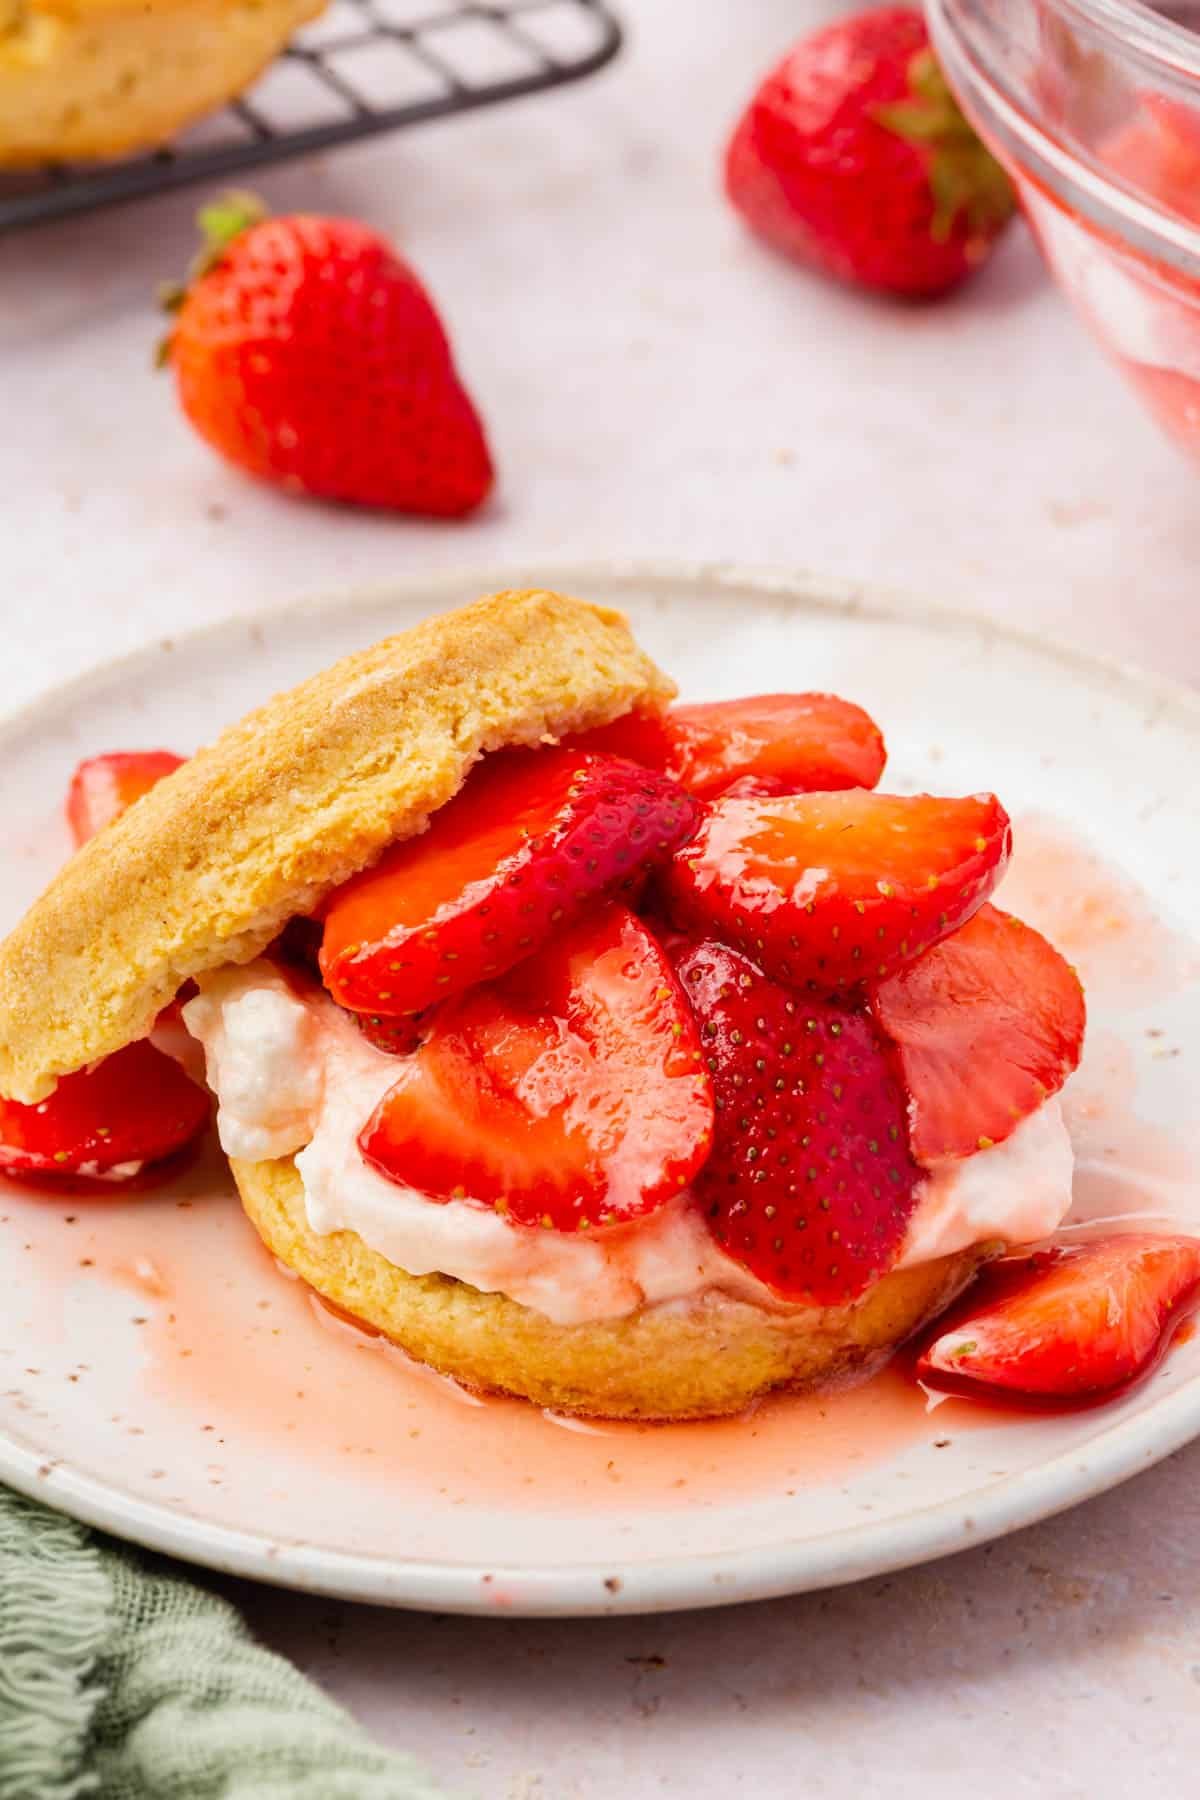 A closeup of a sliced gluten-free biscuit topped with whipped cream and sliced macerated strawberries.